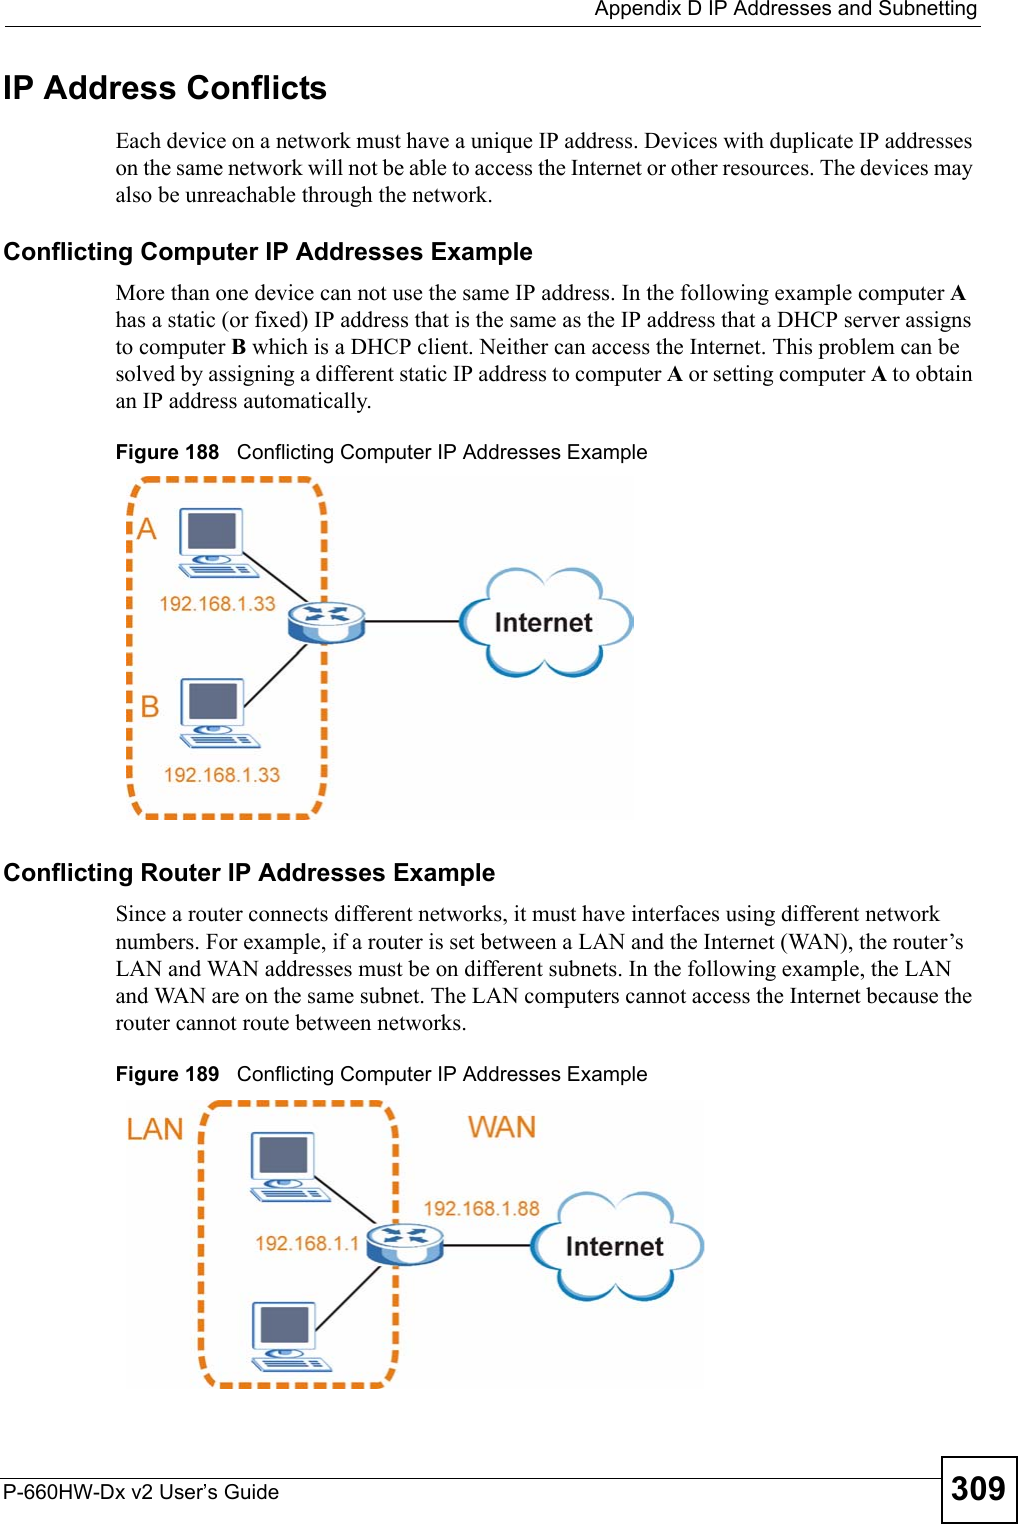  Appendix D IP Addresses and SubnettingP-660HW-Dx v2 User’s Guide 309IP Address ConflictsEach device on a network must have a unique IP address. Devices with duplicate IP addresses on the same network will not be able to access the Internet or other resources. The devices may also be unreachable through the network. Conflicting Computer IP Addresses ExampleMore than one device can not use the same IP address. In the following example computer A has a static (or fixed) IP address that is the same as the IP address that a DHCP server assigns to computer B which is a DHCP client. Neither can access the Internet. This problem can be solved by assigning a different static IP address to computer A or setting computer A to obtain an IP address automatically.  Figure 188   Conflicting Computer IP Addresses ExampleConflicting Router IP Addresses ExampleSince a router connects different networks, it must have interfaces using different network numbers. For example, if a router is set between a LAN and the Internet (WAN), the router’s LAN and WAN addresses must be on different subnets. In the following example, the LAN and WAN are on the same subnet. The LAN computers cannot access the Internet because the router cannot route between networks.Figure 189   Conflicting Computer IP Addresses Example